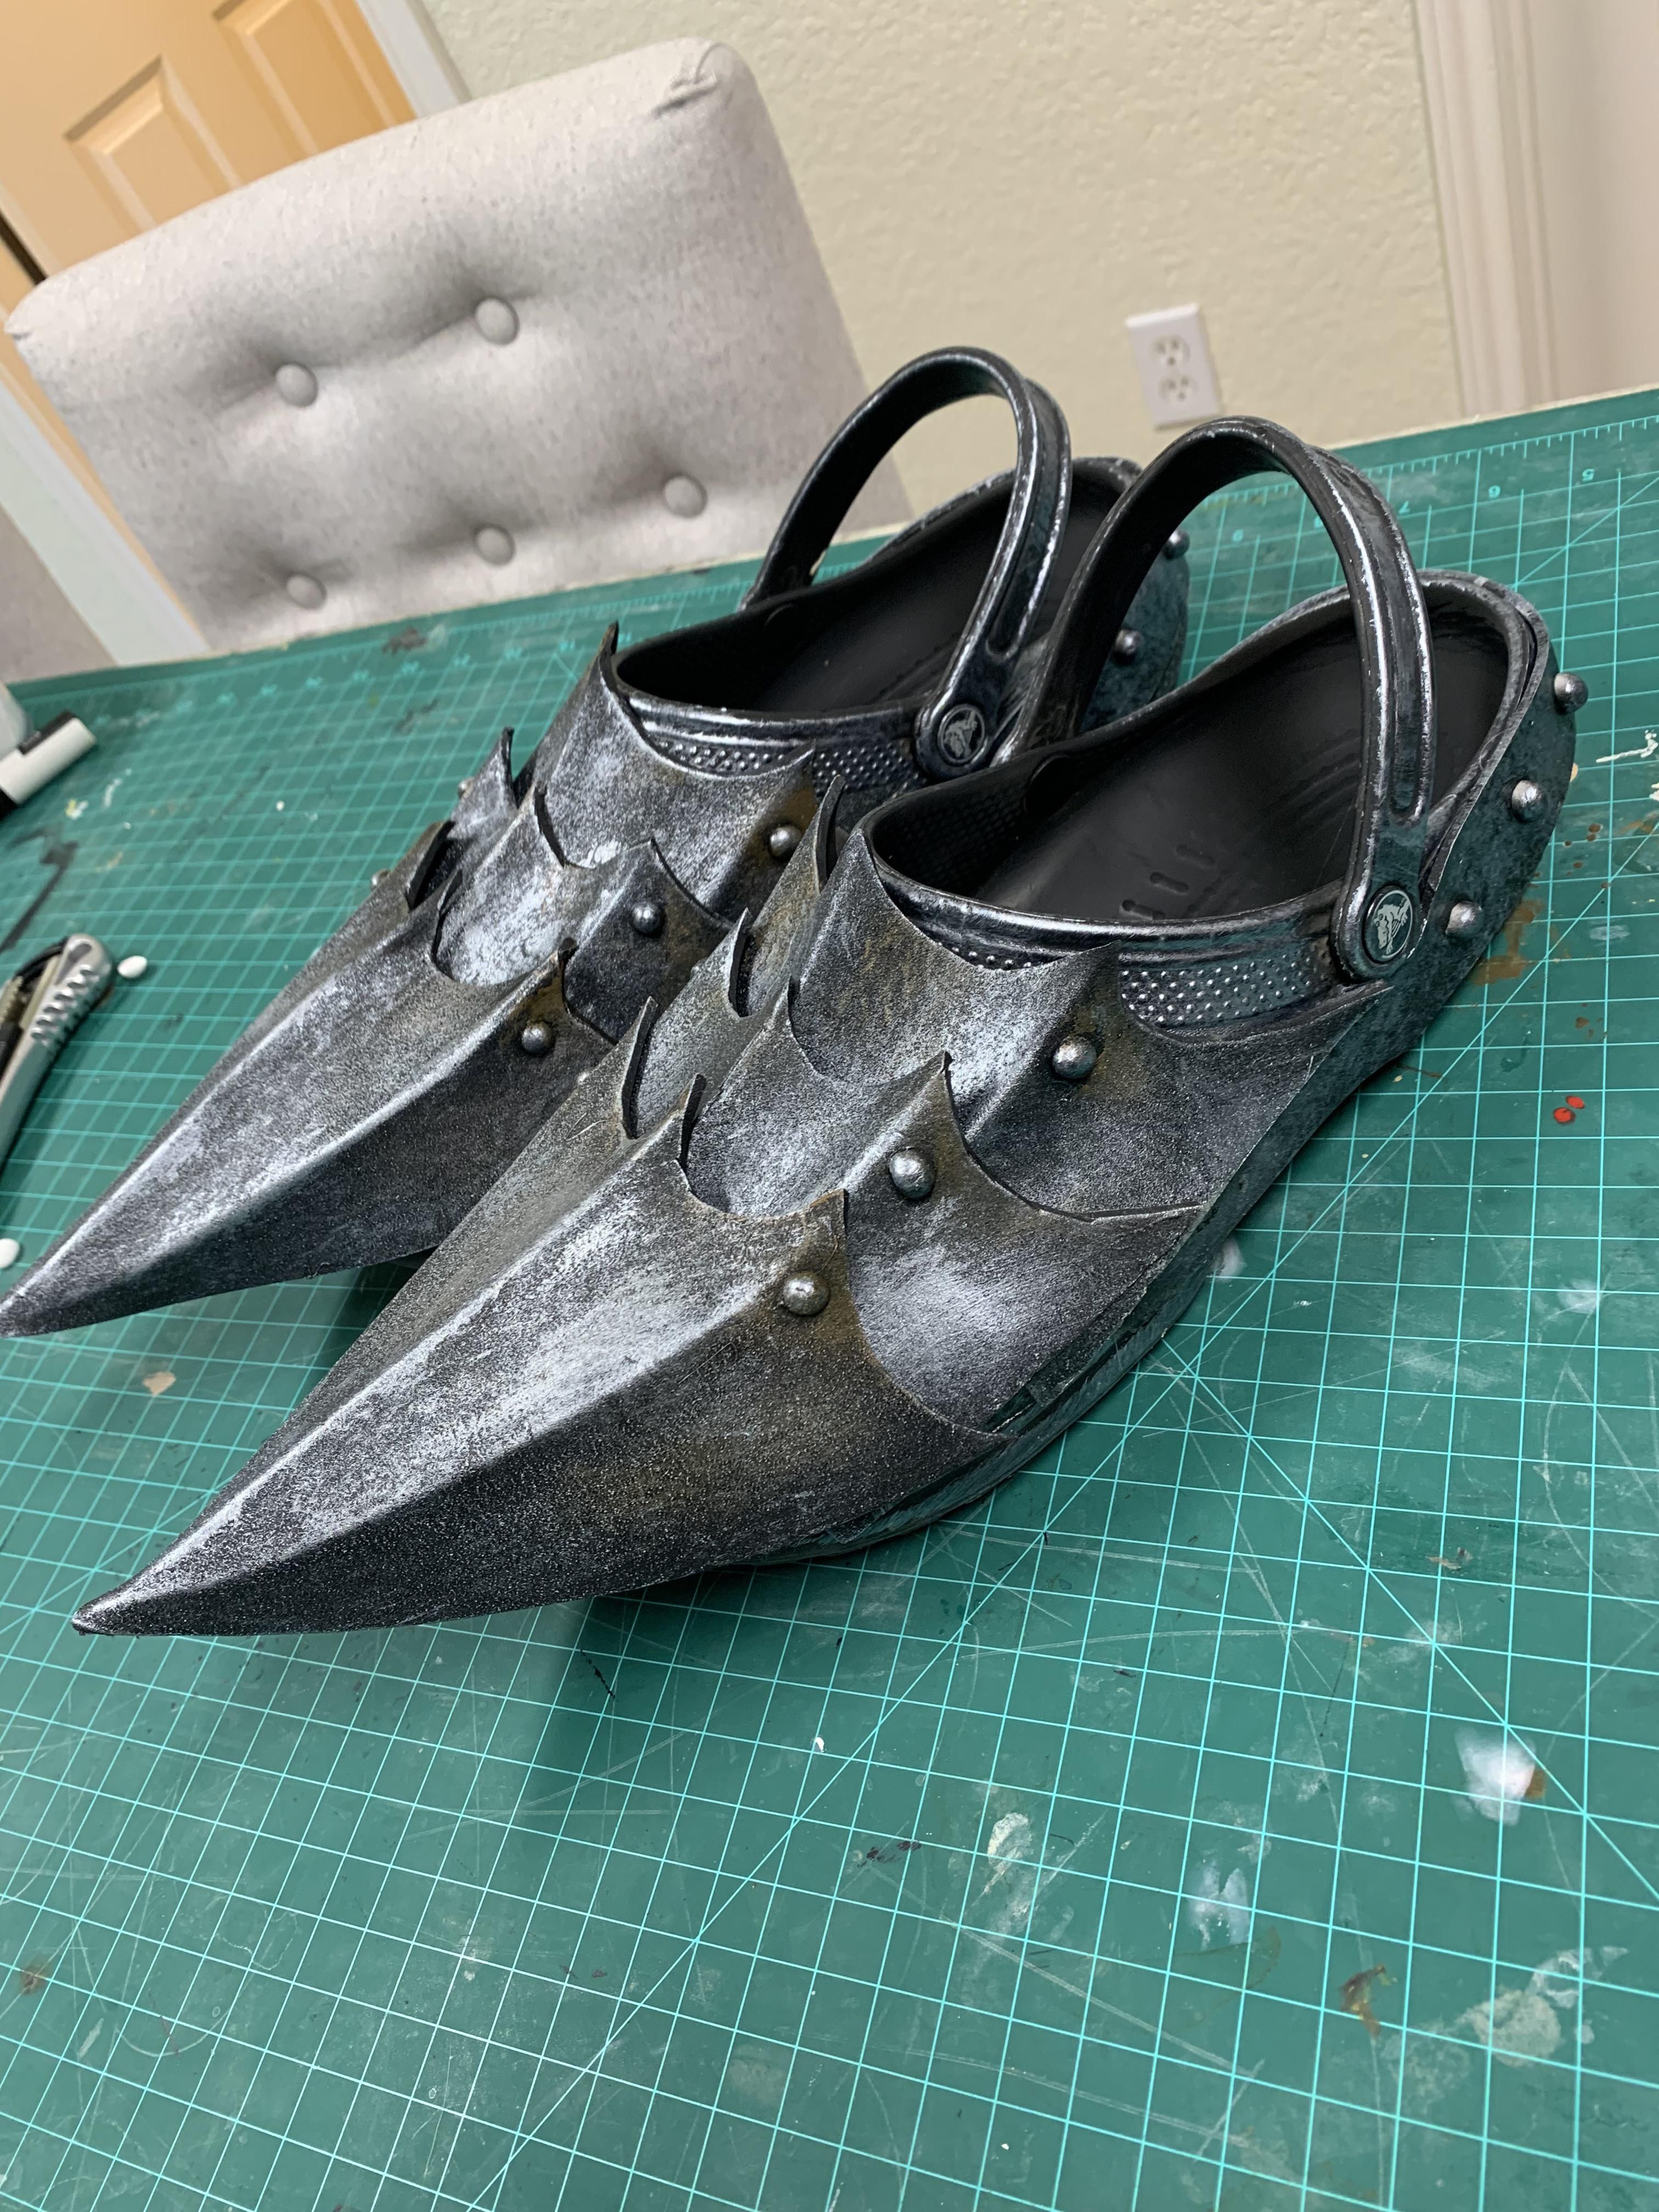 Made Armored Crocs for my Nazgûl costume.